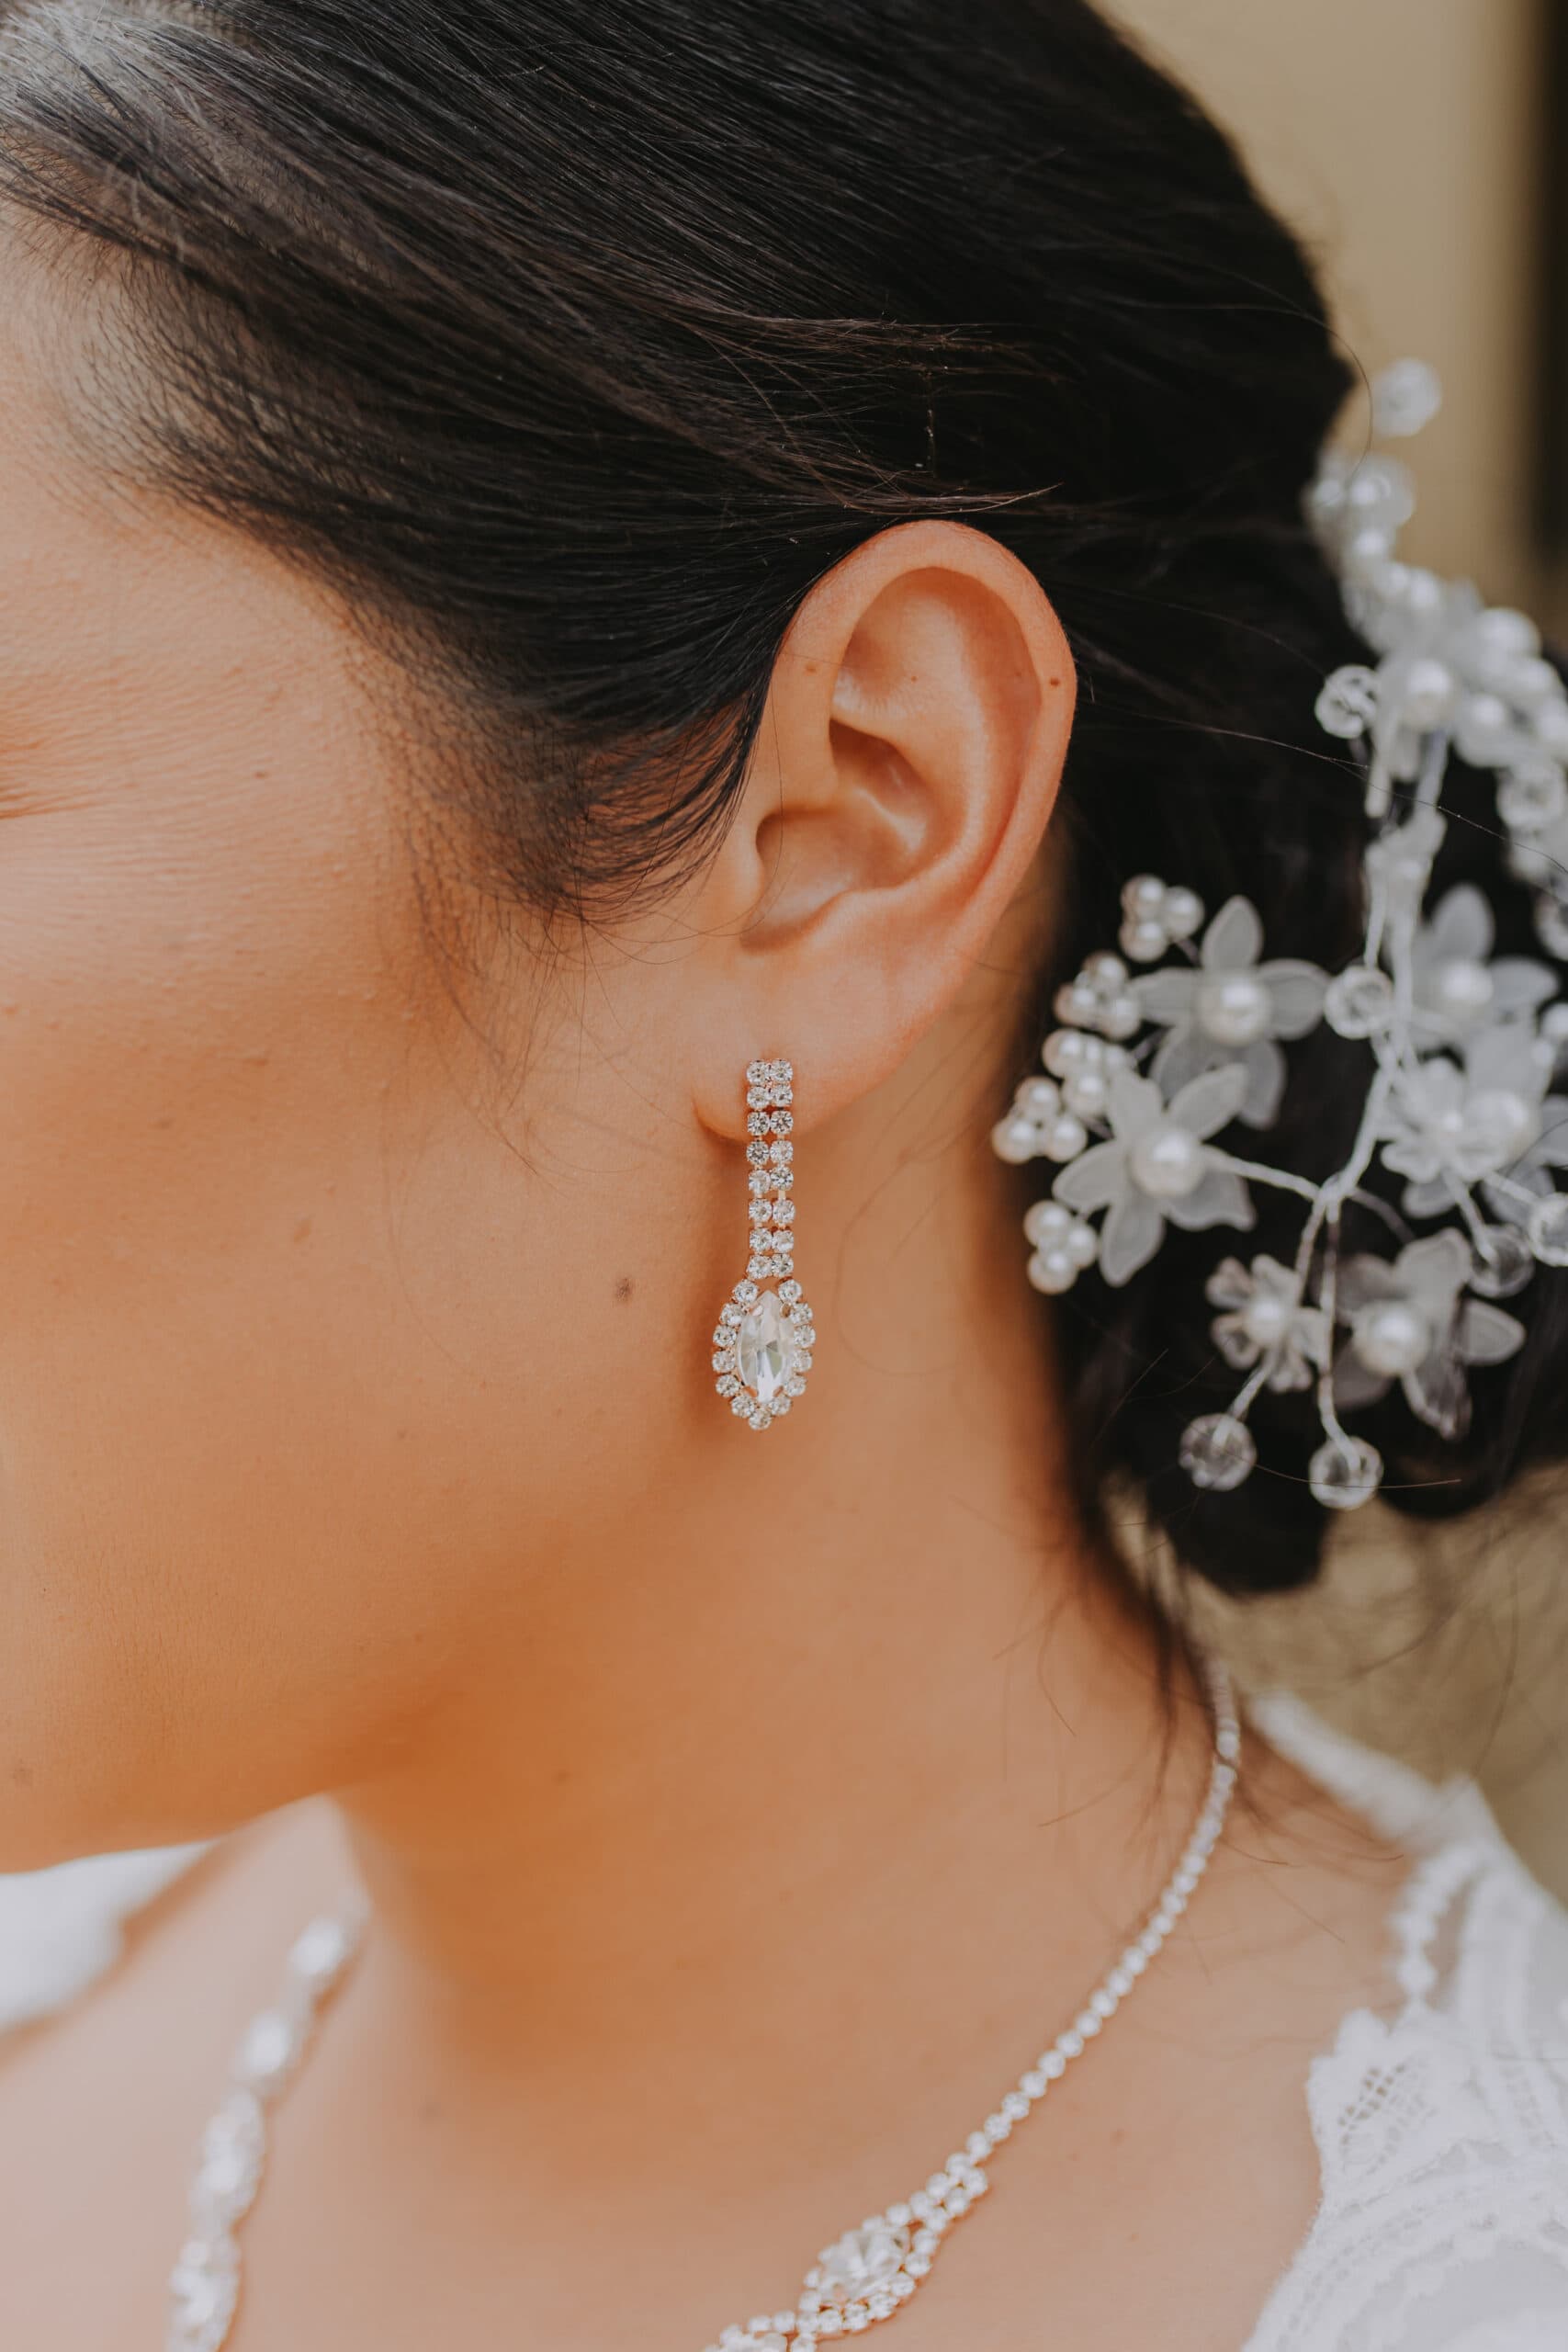 Wedding photography. A close up photo of a bride's earrings